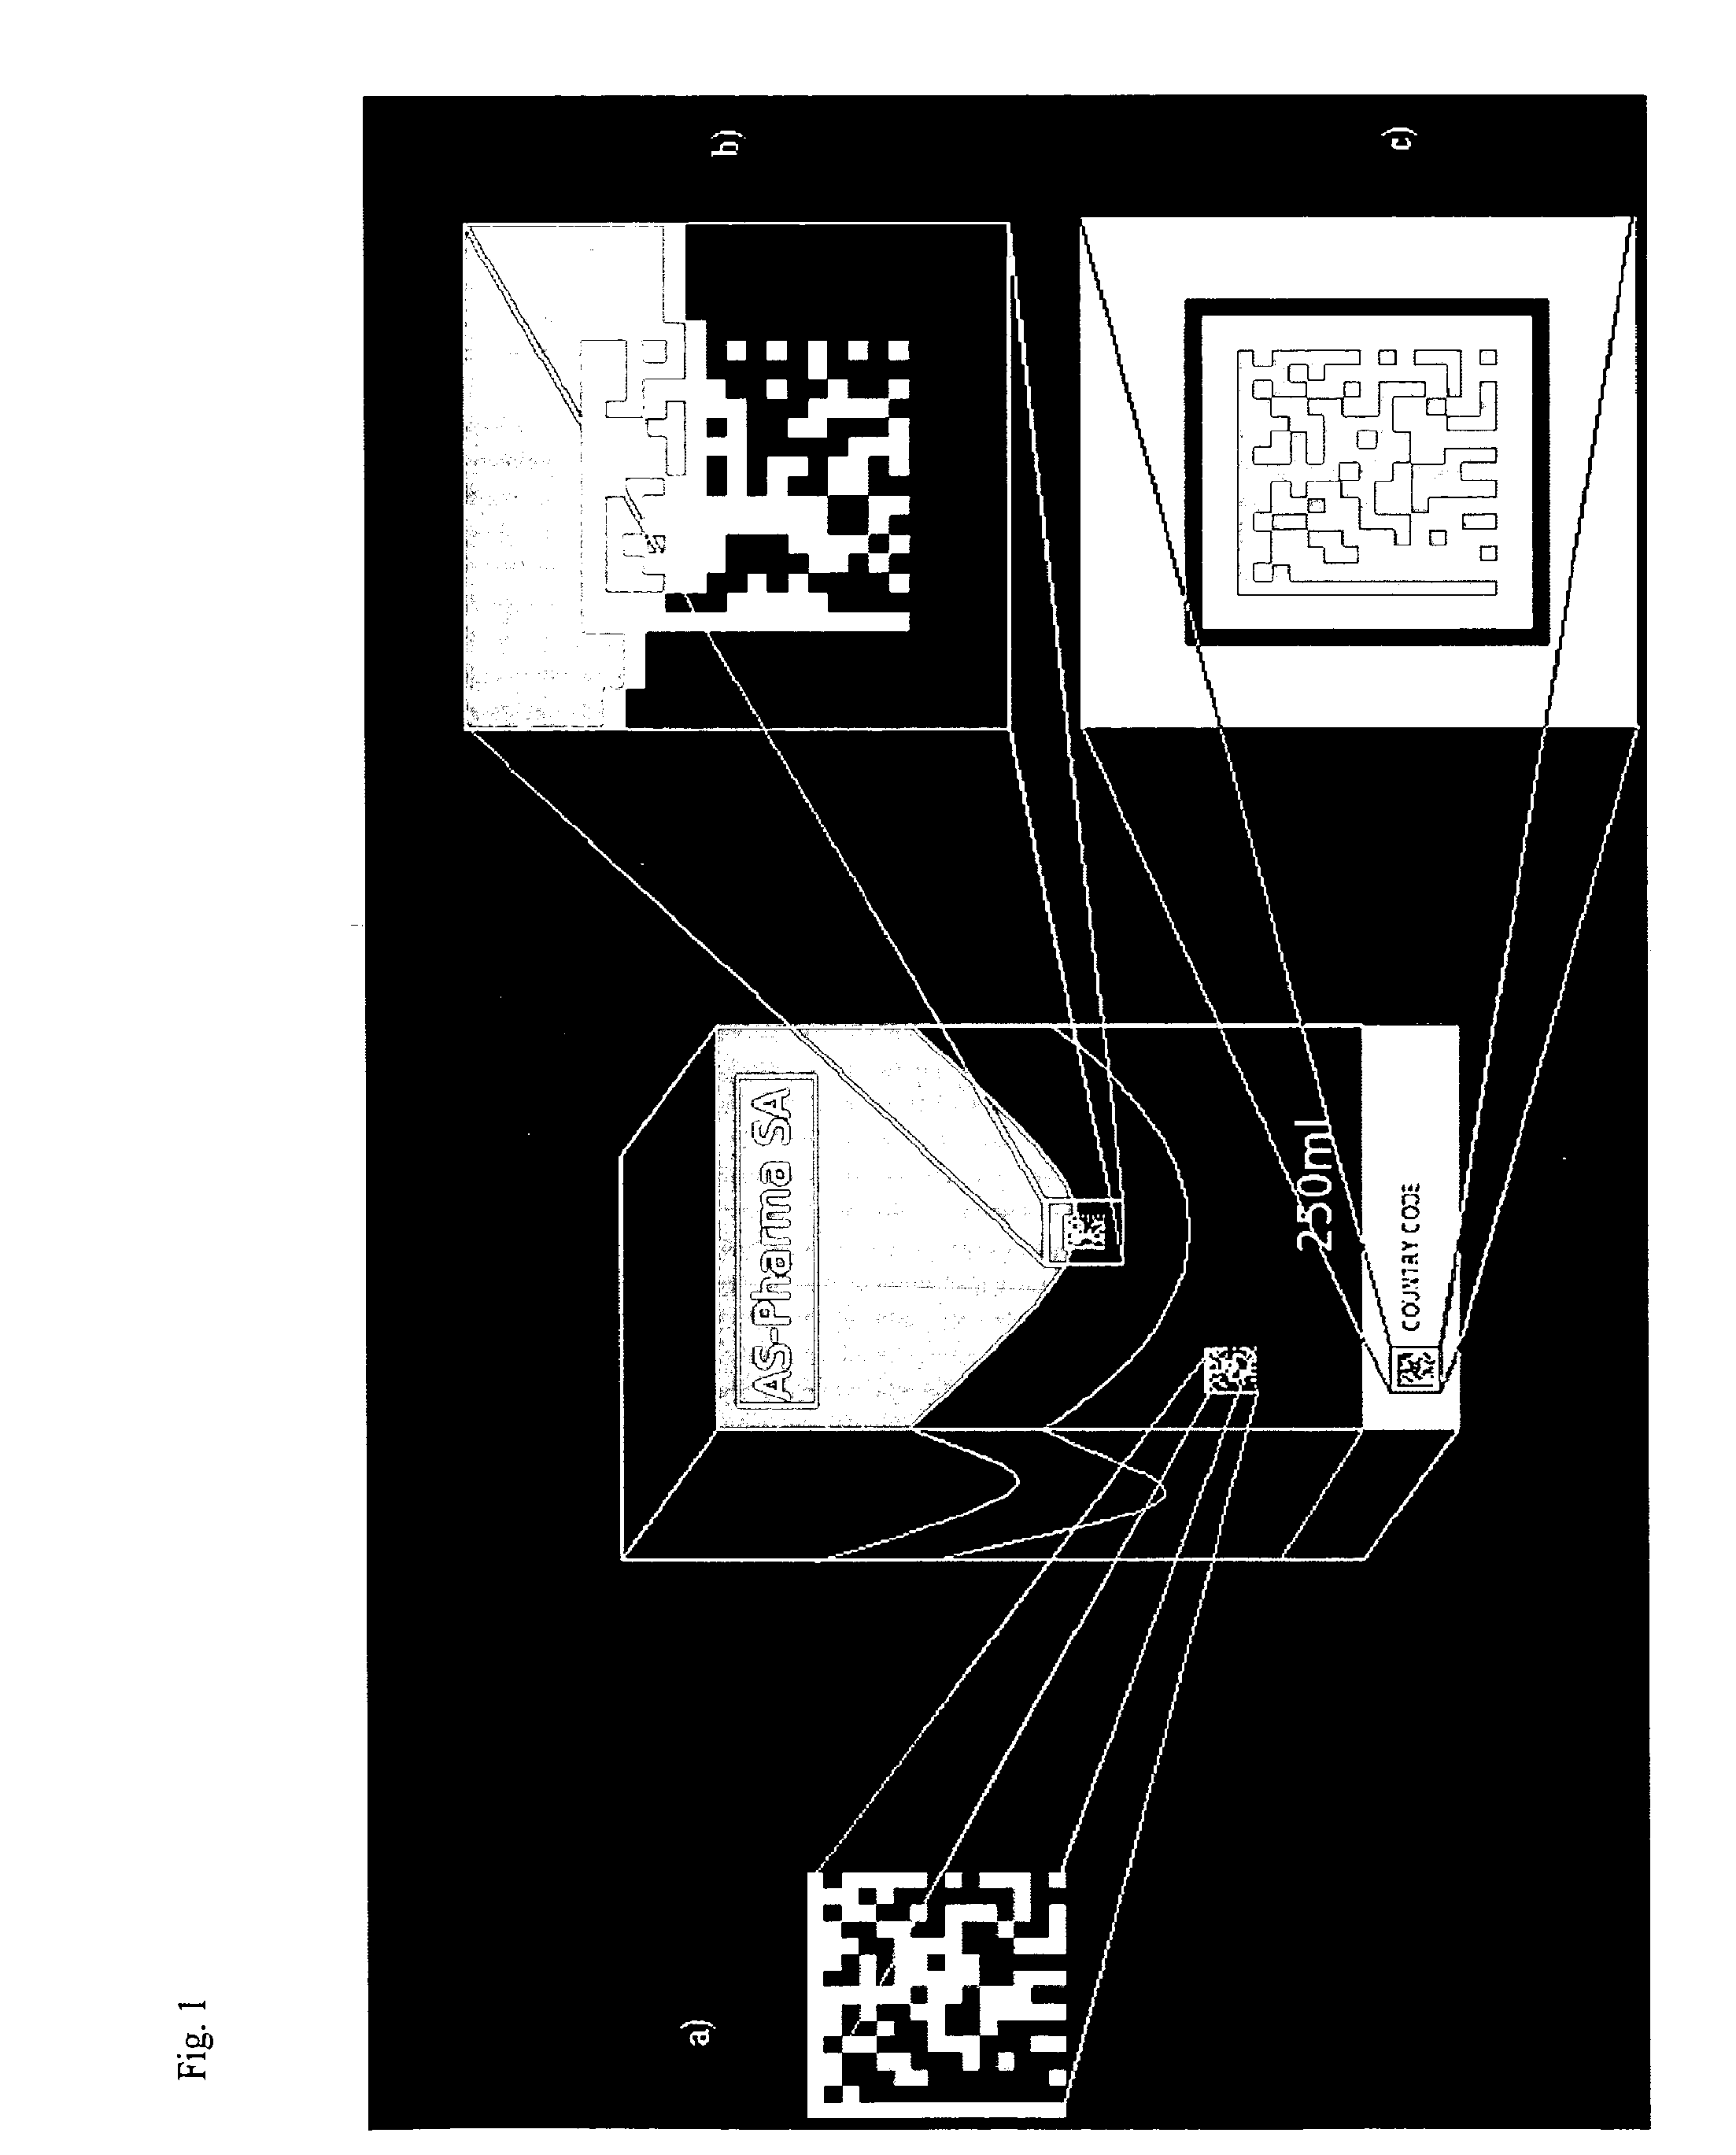 Identification and authentication using polymeric liquid crystal material markings